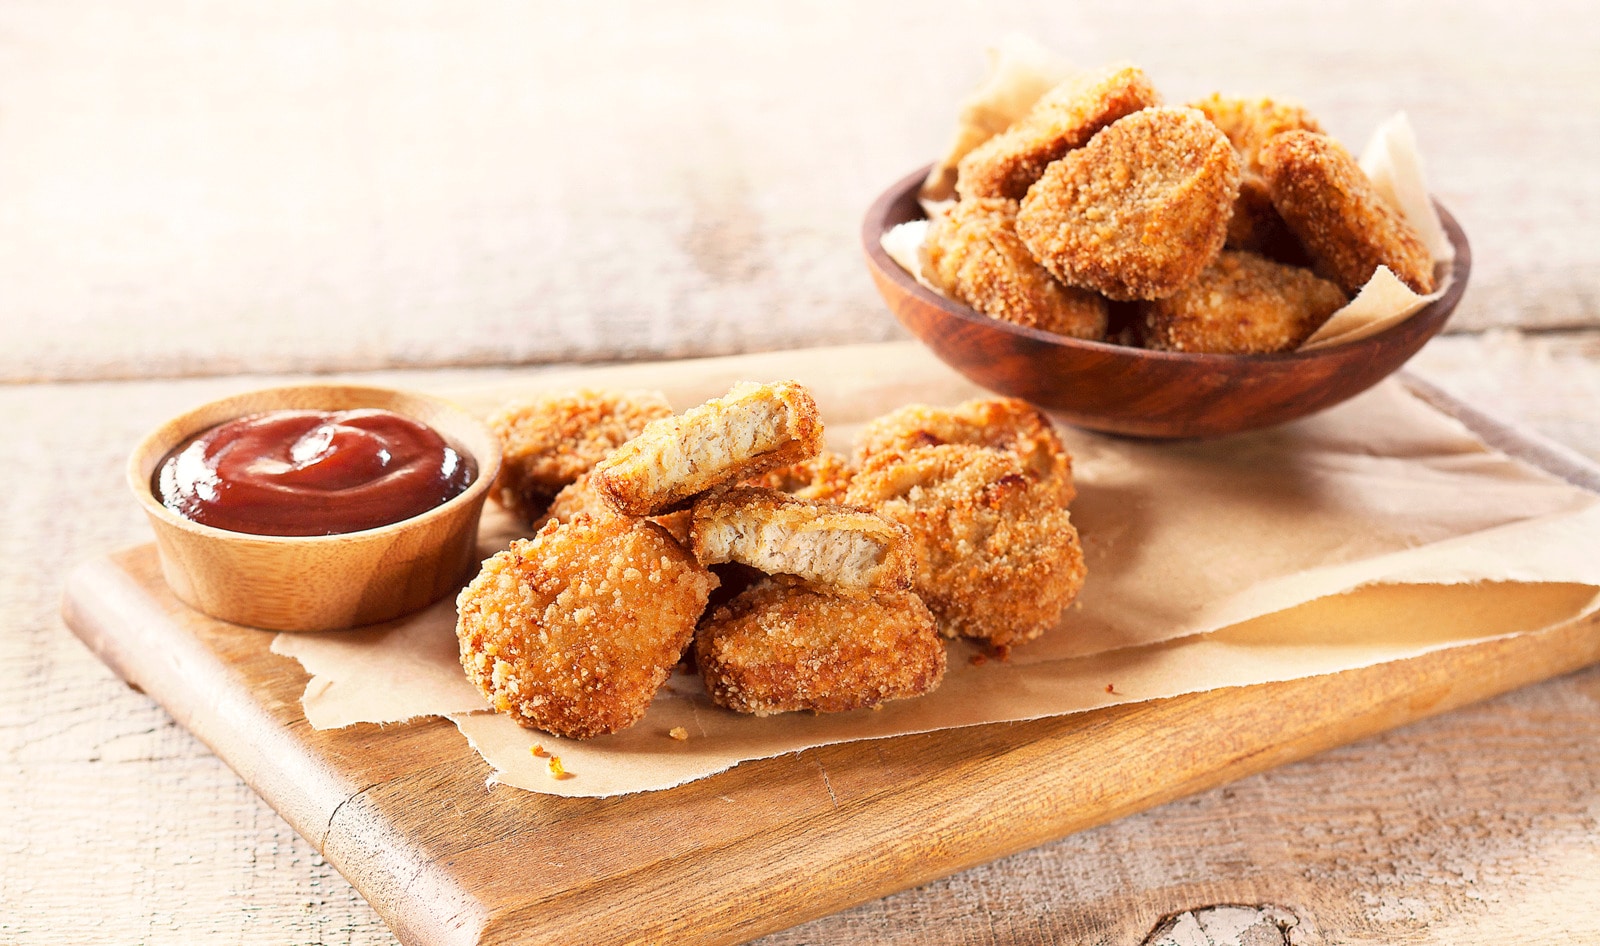 Vegan Chicken Nuggets May Soon Be at School Cafeterias Nationwide